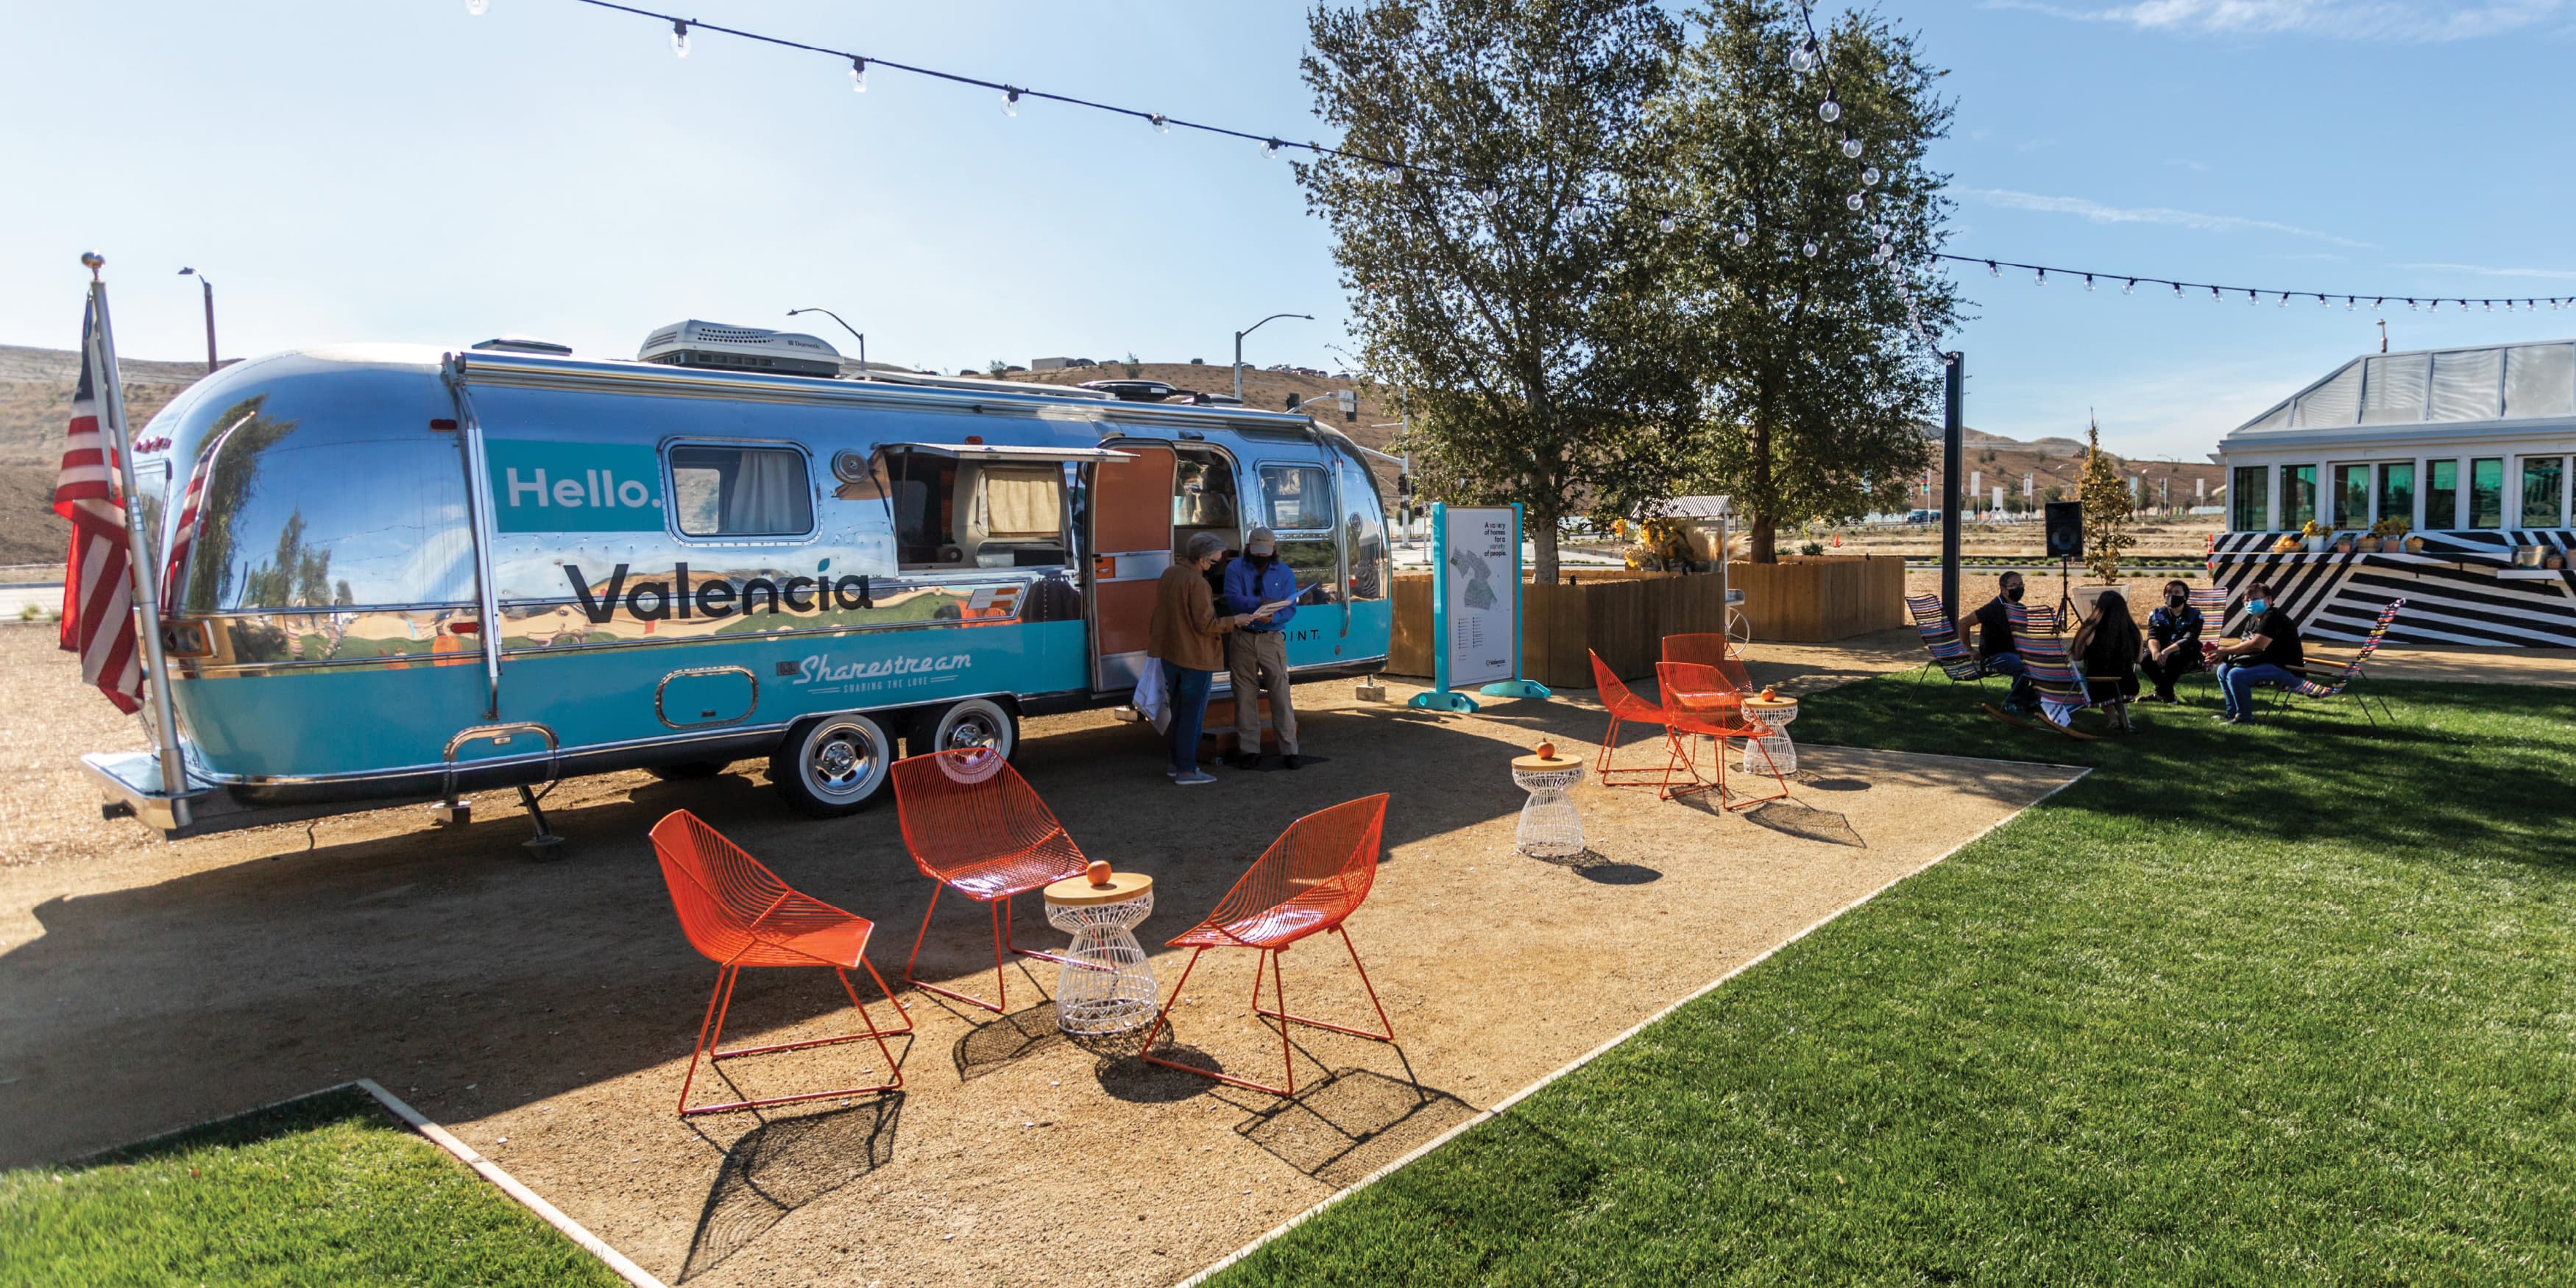 Image of the Valencia Sharestream, an airstream converted into a community hub that host events and hold marketing materials. Airstream designed by RSM Design. 